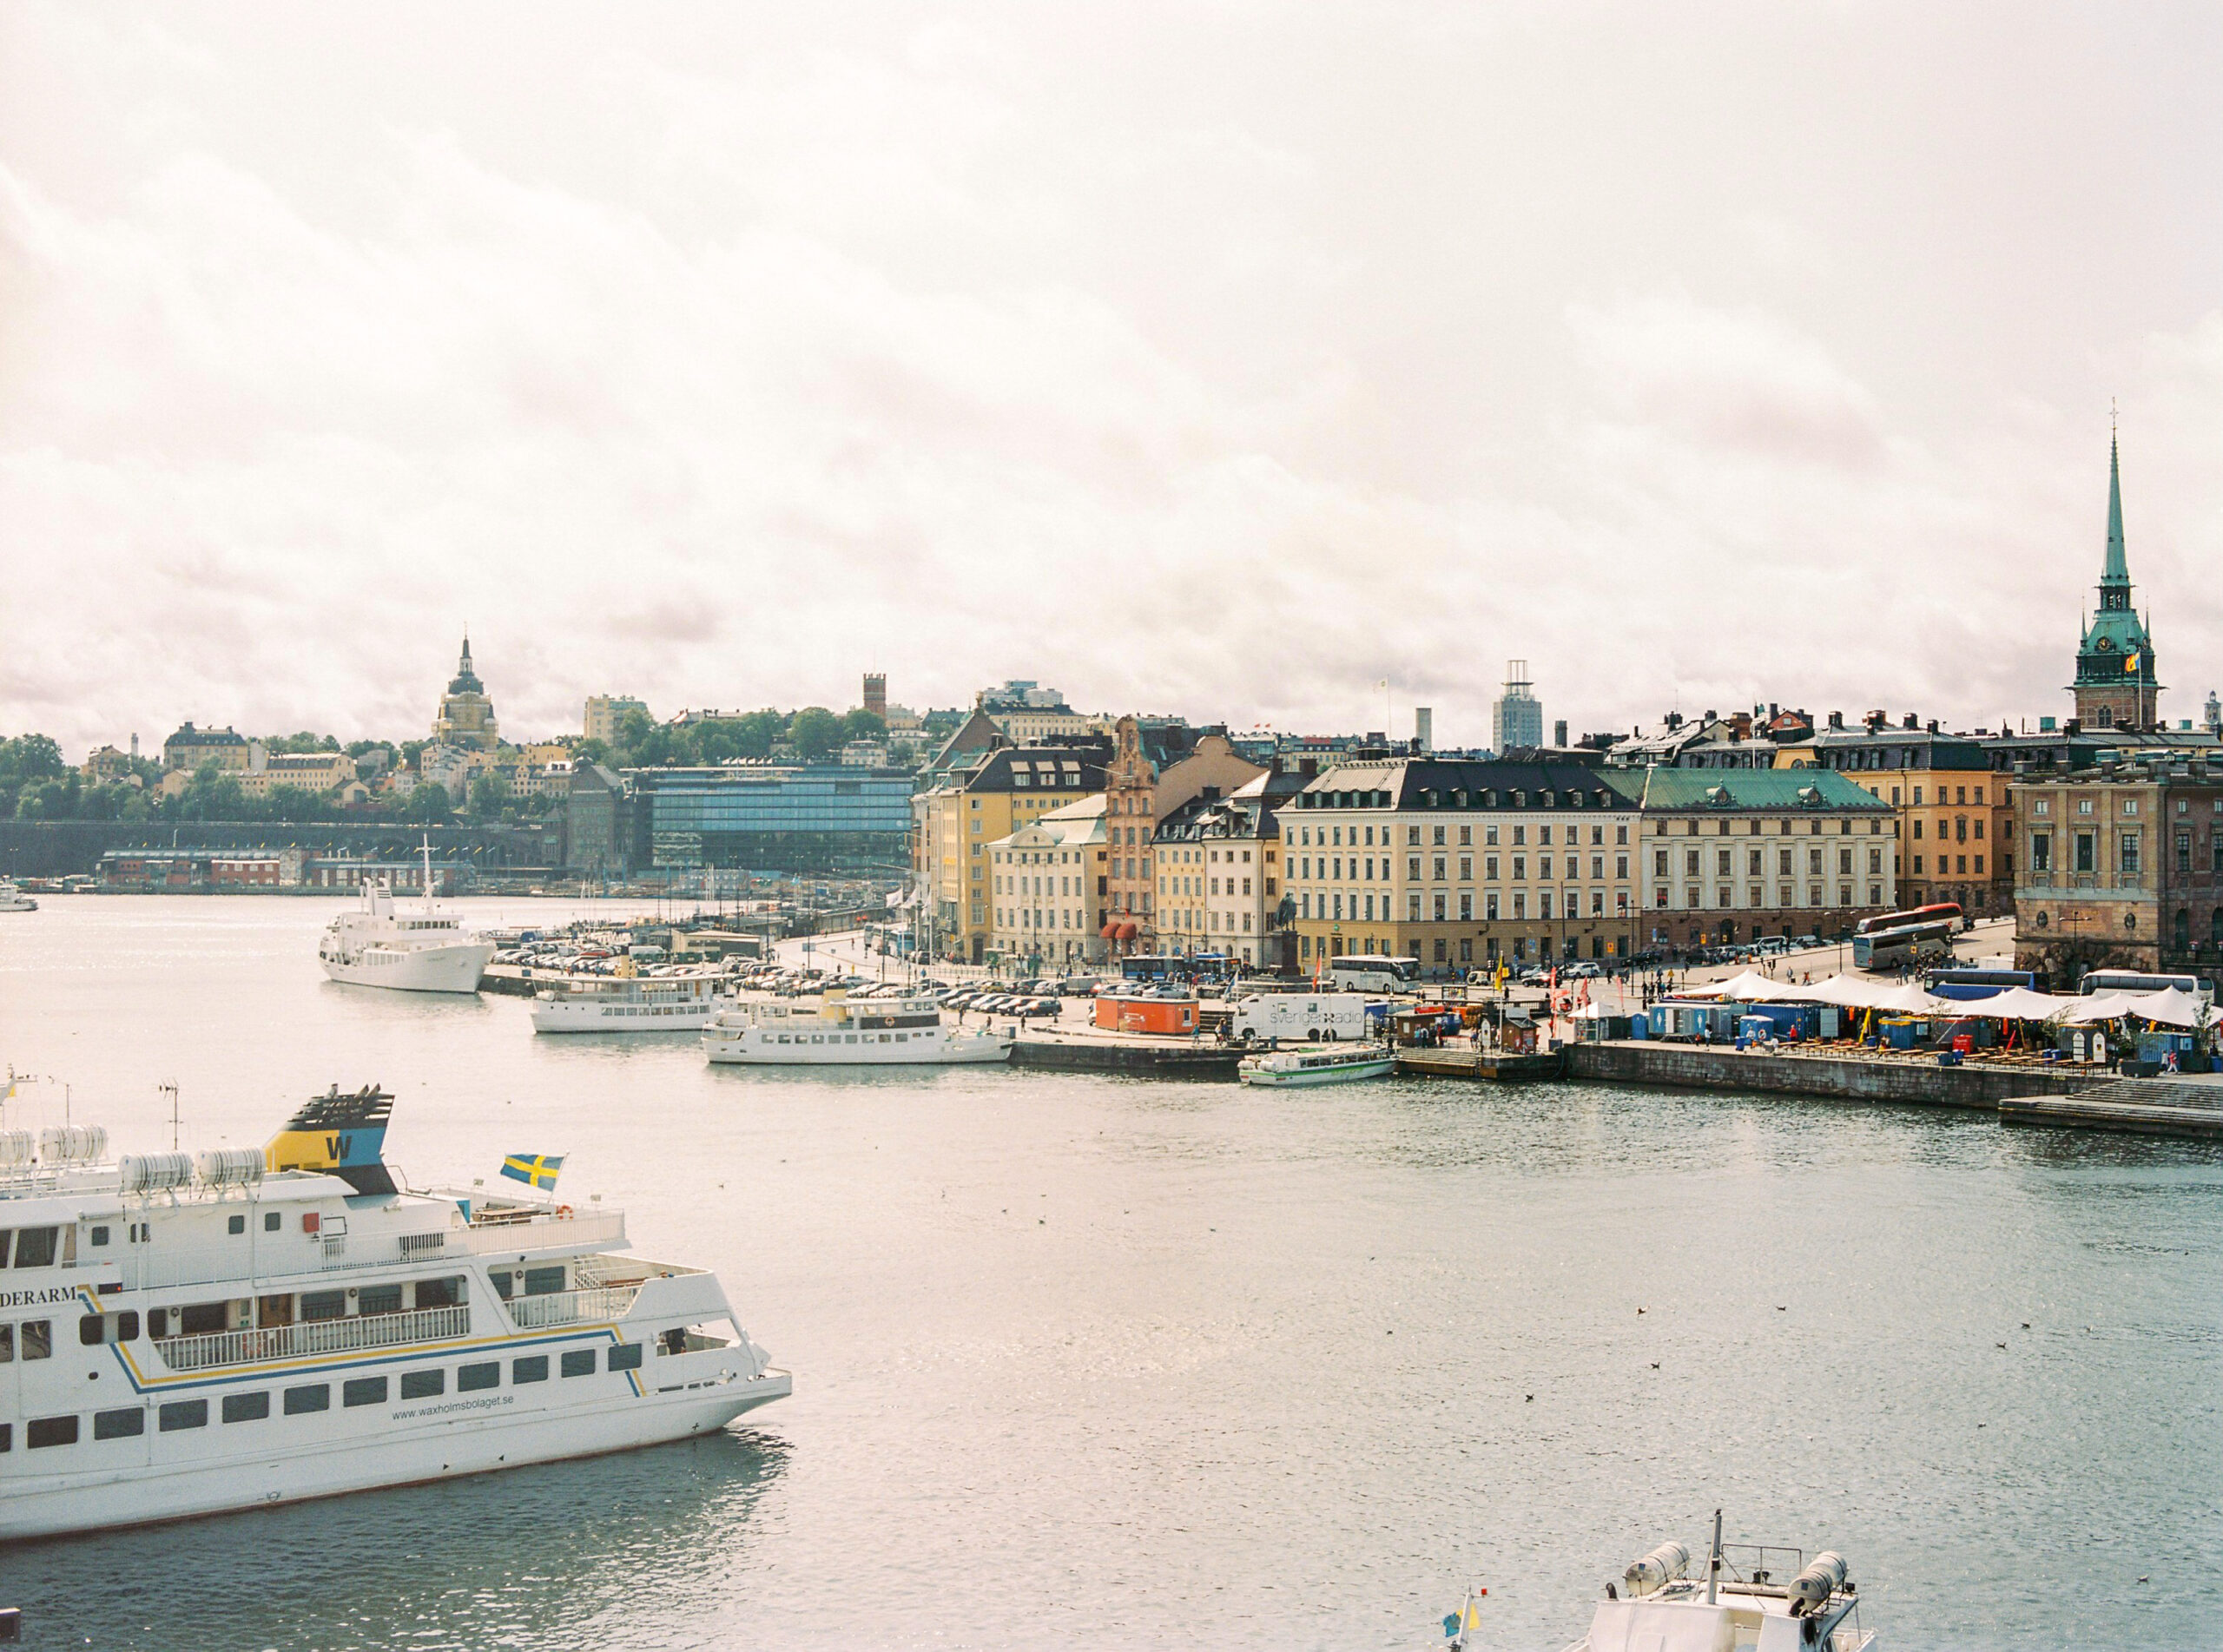 View from Grand Hotel Stockholm over the Royal Castle.